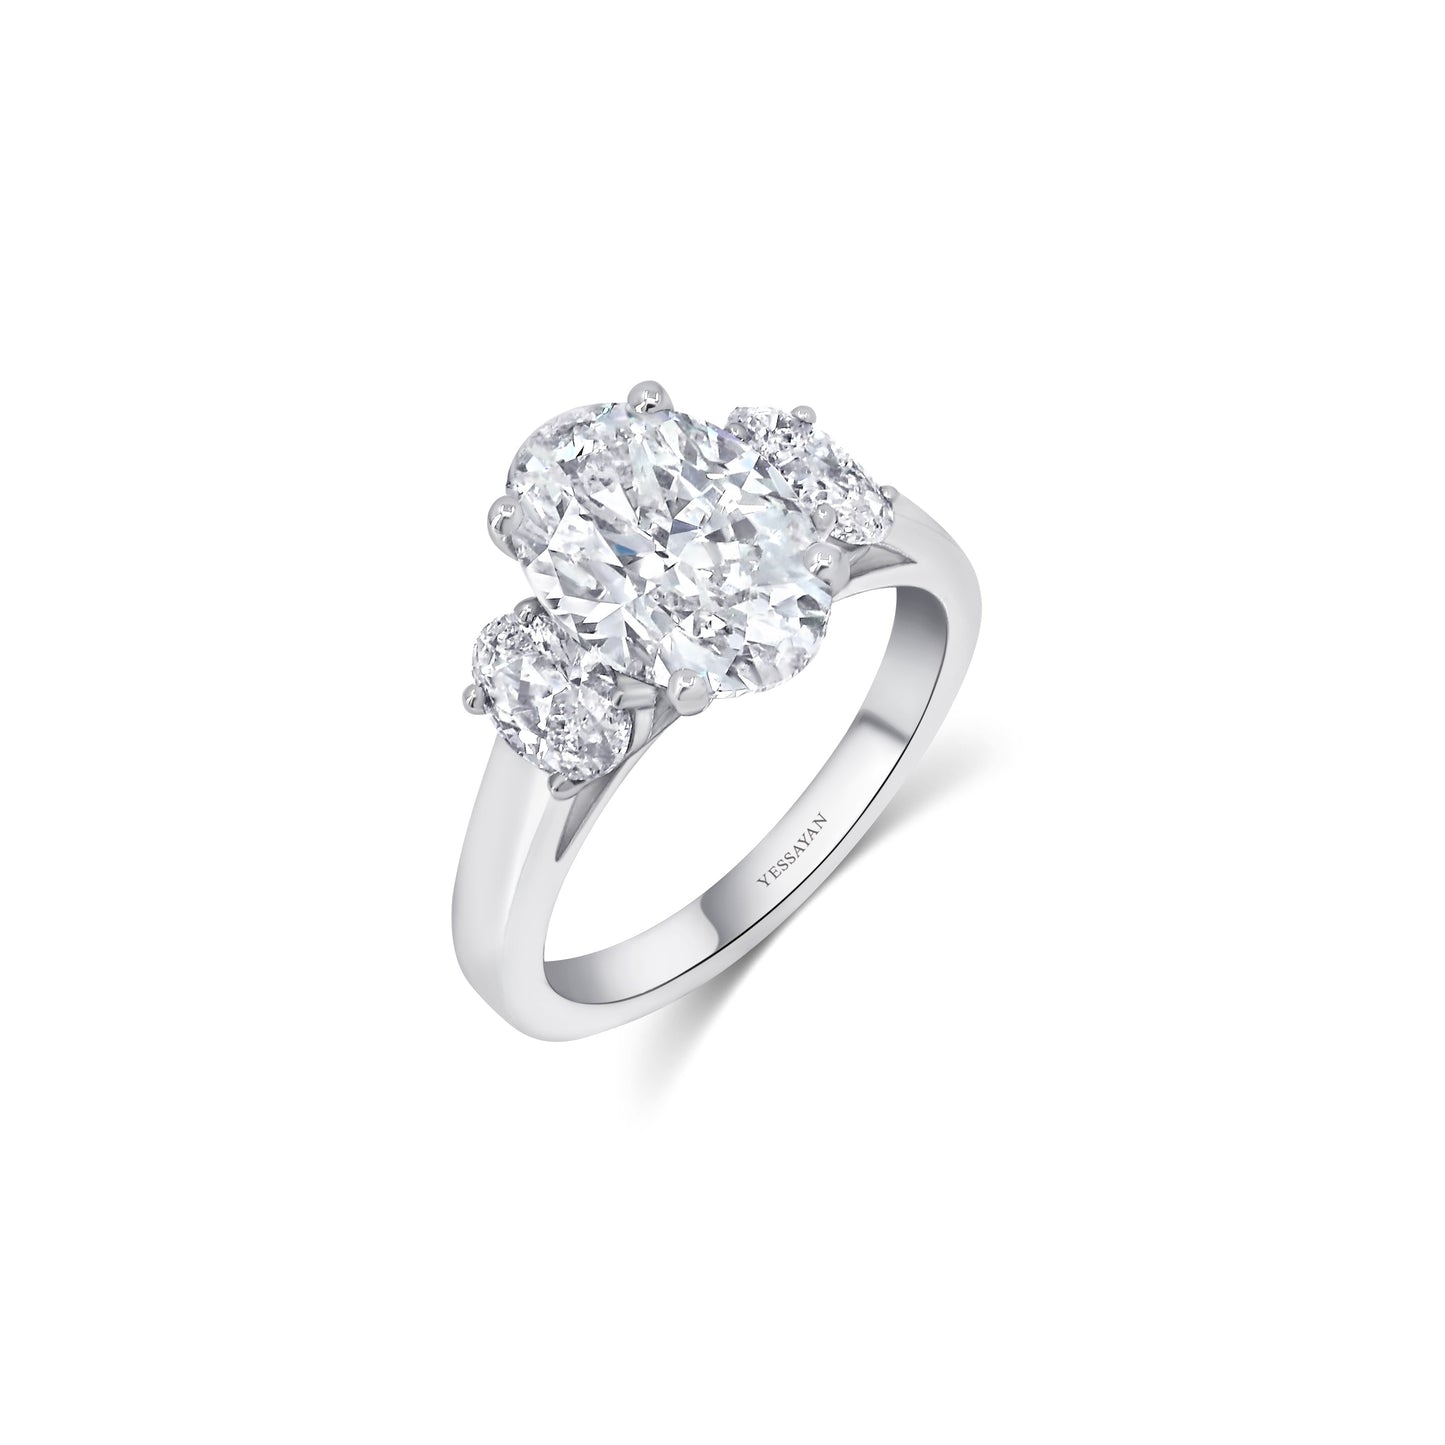 Almasaty 5.01 Carats Certified Oval Cut Solitaire Diamond Ring